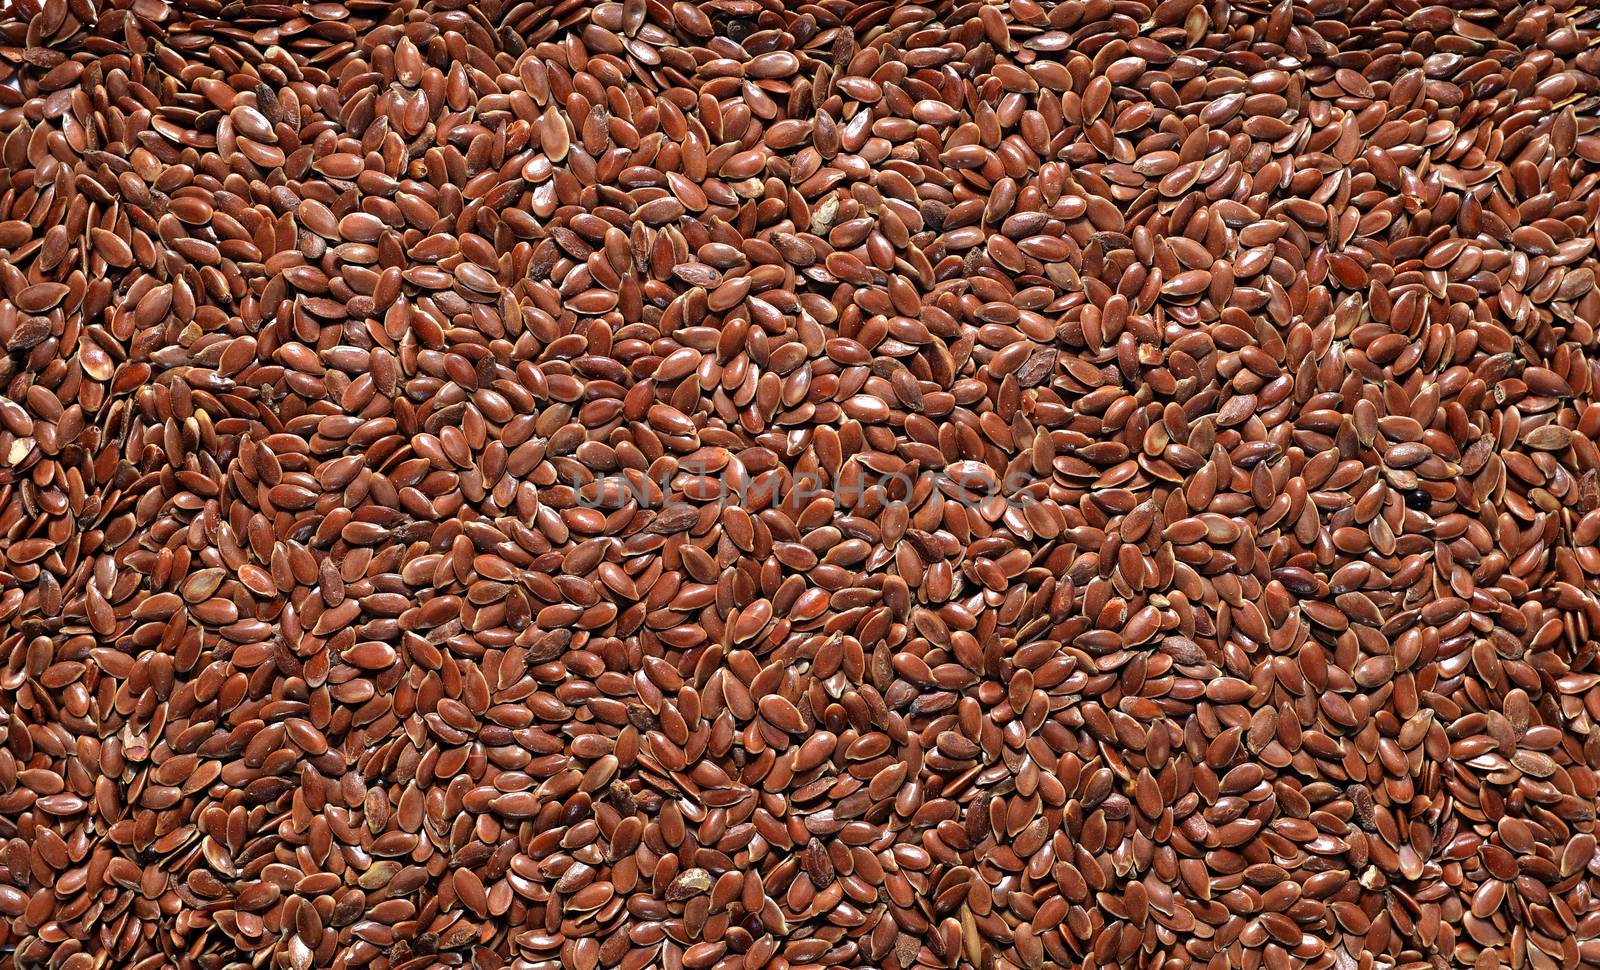 Flax plant seed texture natural pattern background